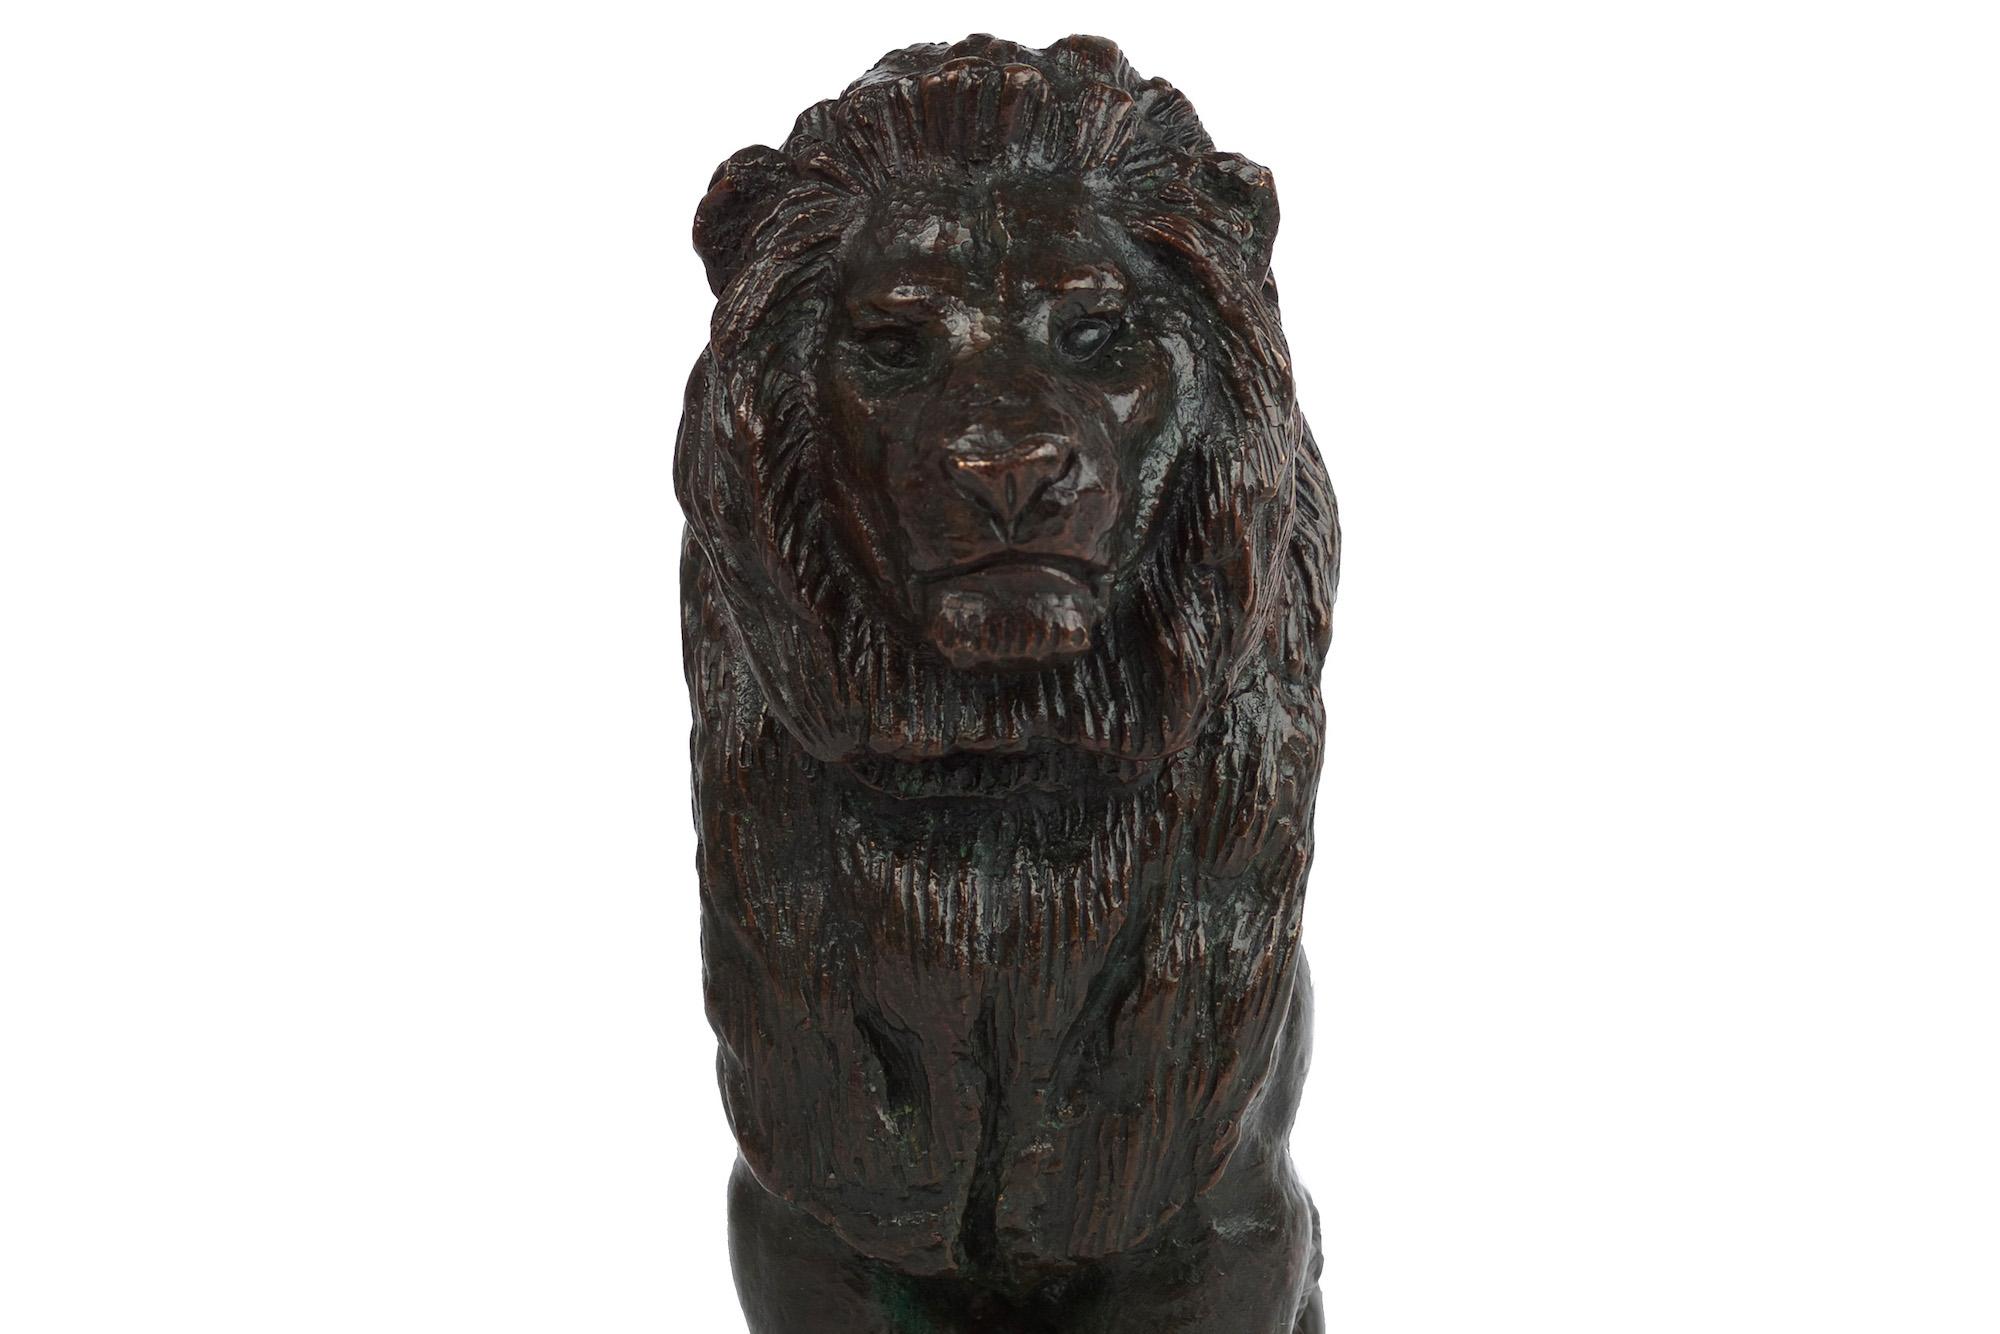 19th Century Rare French Antique Bronze Sculpture “Lion Assis no.2” after Antoine-Louis Barye For Sale